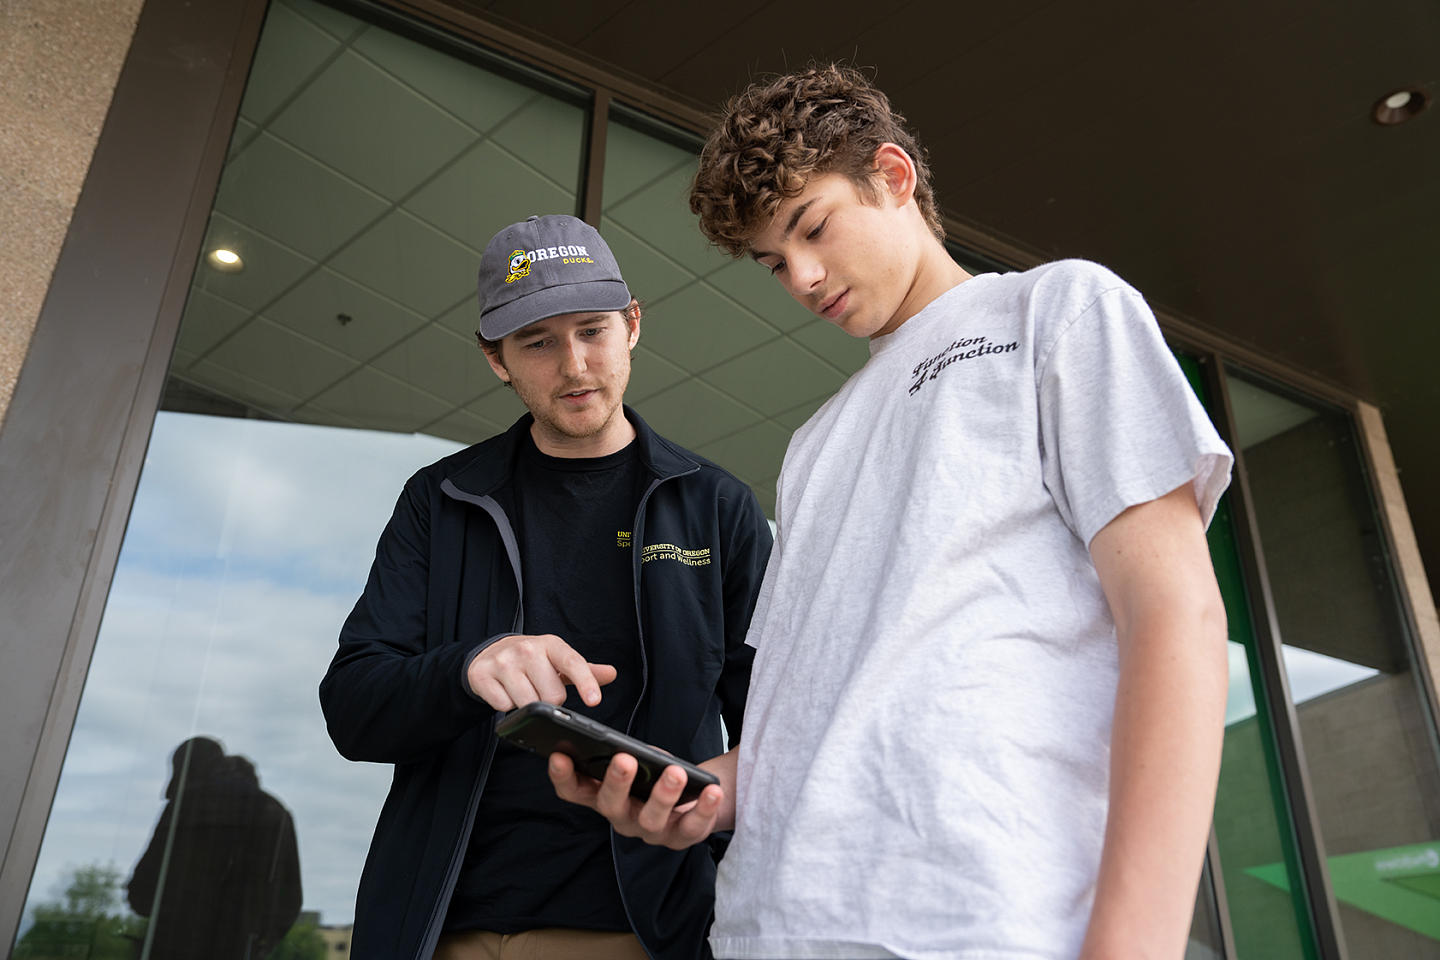 Researcher Zach Farley guides a teen participant through use of a smartphone app for data collection